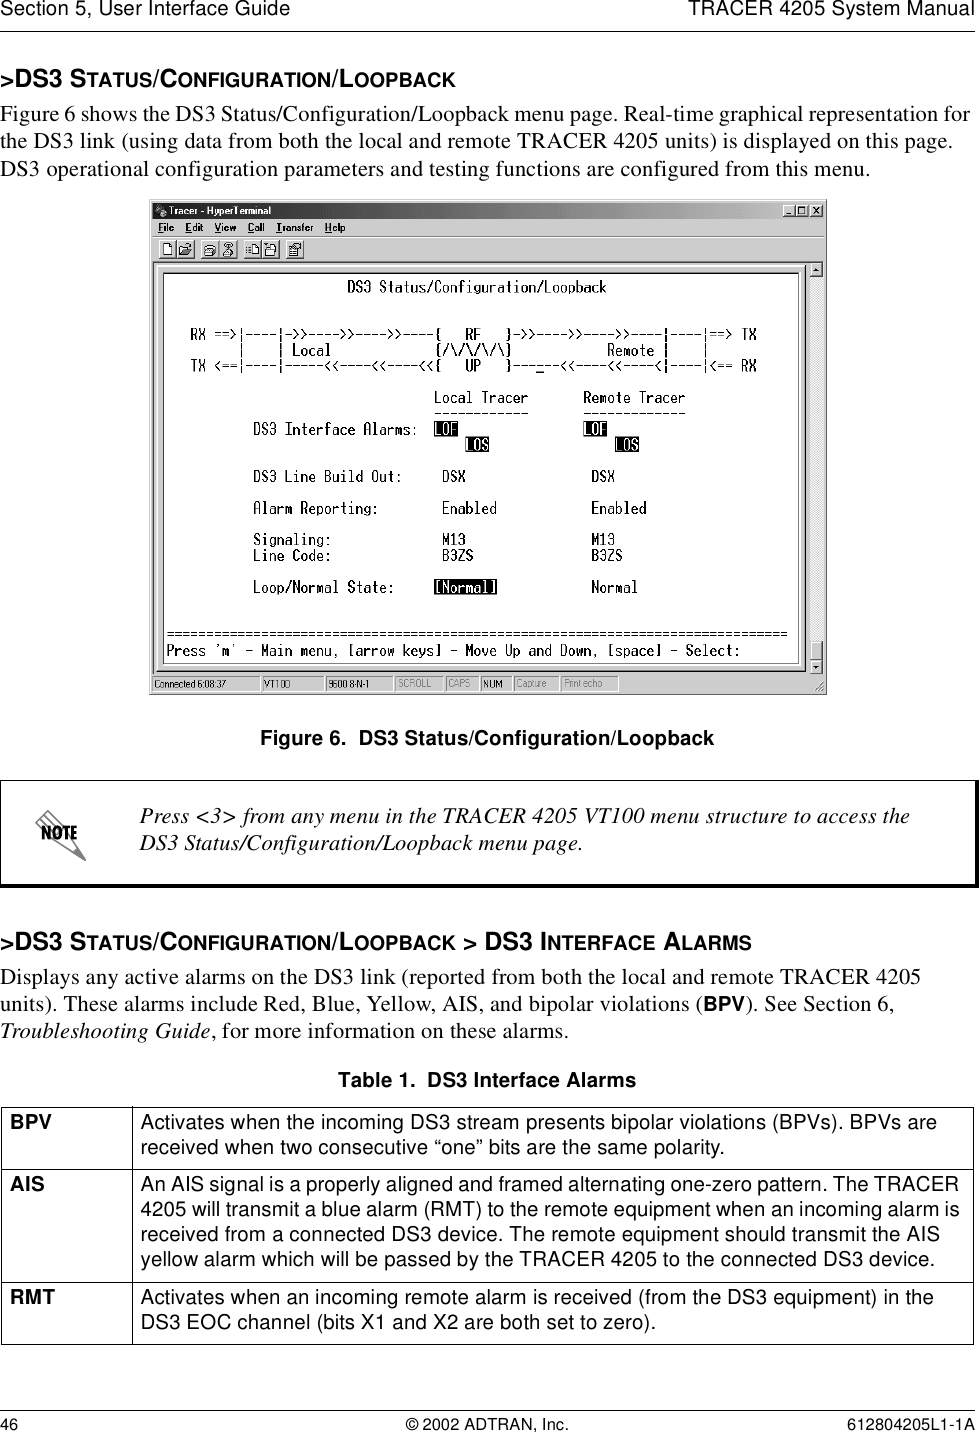 Section 5, User Interface Guide TRACER 4205 System Manual46 © 2002 ADTRAN, Inc. 612804205L1-1A&gt;DS3 STATUS/CONFIGURATION/LOOPBACKFigure 6 shows the DS3 Status/Configuration/Loopback menu page. Real-time graphical representation for the DS3 link (using data from both the local and remote TRACER 4205 units) is displayed on this page. DS3 operational configuration parameters and testing functions are configured from this menu.Figure 6.  DS3 Status/Configuration/Loopback&gt;DS3 STATUS/CONFIGURATION/LOOPBACK &gt; DS3 INTERFACE ALARMSDisplays any active alarms on the DS3 link (reported from both the local and remote TRACER 4205 units). These alarms include Red, Blue, Yellow, AIS, and bipolar violations (BPV). See Section 6, Troubleshooting Guide, for more information on these alarms.Press &lt;3&gt; from any menu in the TRACER 4205 VT100 menu structure to access the DS3 Status/Configuration/Loopback menu page.Table 1.  DS3 Interface AlarmsBPV Activates when the incoming DS3 stream presents bipolar violations (BPVs). BPVs are received when two consecutive “one” bits are the same polarity.AIS An AIS signal is a properly aligned and framed alternating one-zero pattern. The TRACER 4205 will transmit a blue alarm (RMT) to the remote equipment when an incoming alarm is received from a connected DS3 device. The remote equipment should transmit the AIS yellow alarm which will be passed by the TRACER 4205 to the connected DS3 device.RMT Activates when an incoming remote alarm is received (from the DS3 equipment) in the DS3 EOC channel (bits X1 and X2 are both set to zero).